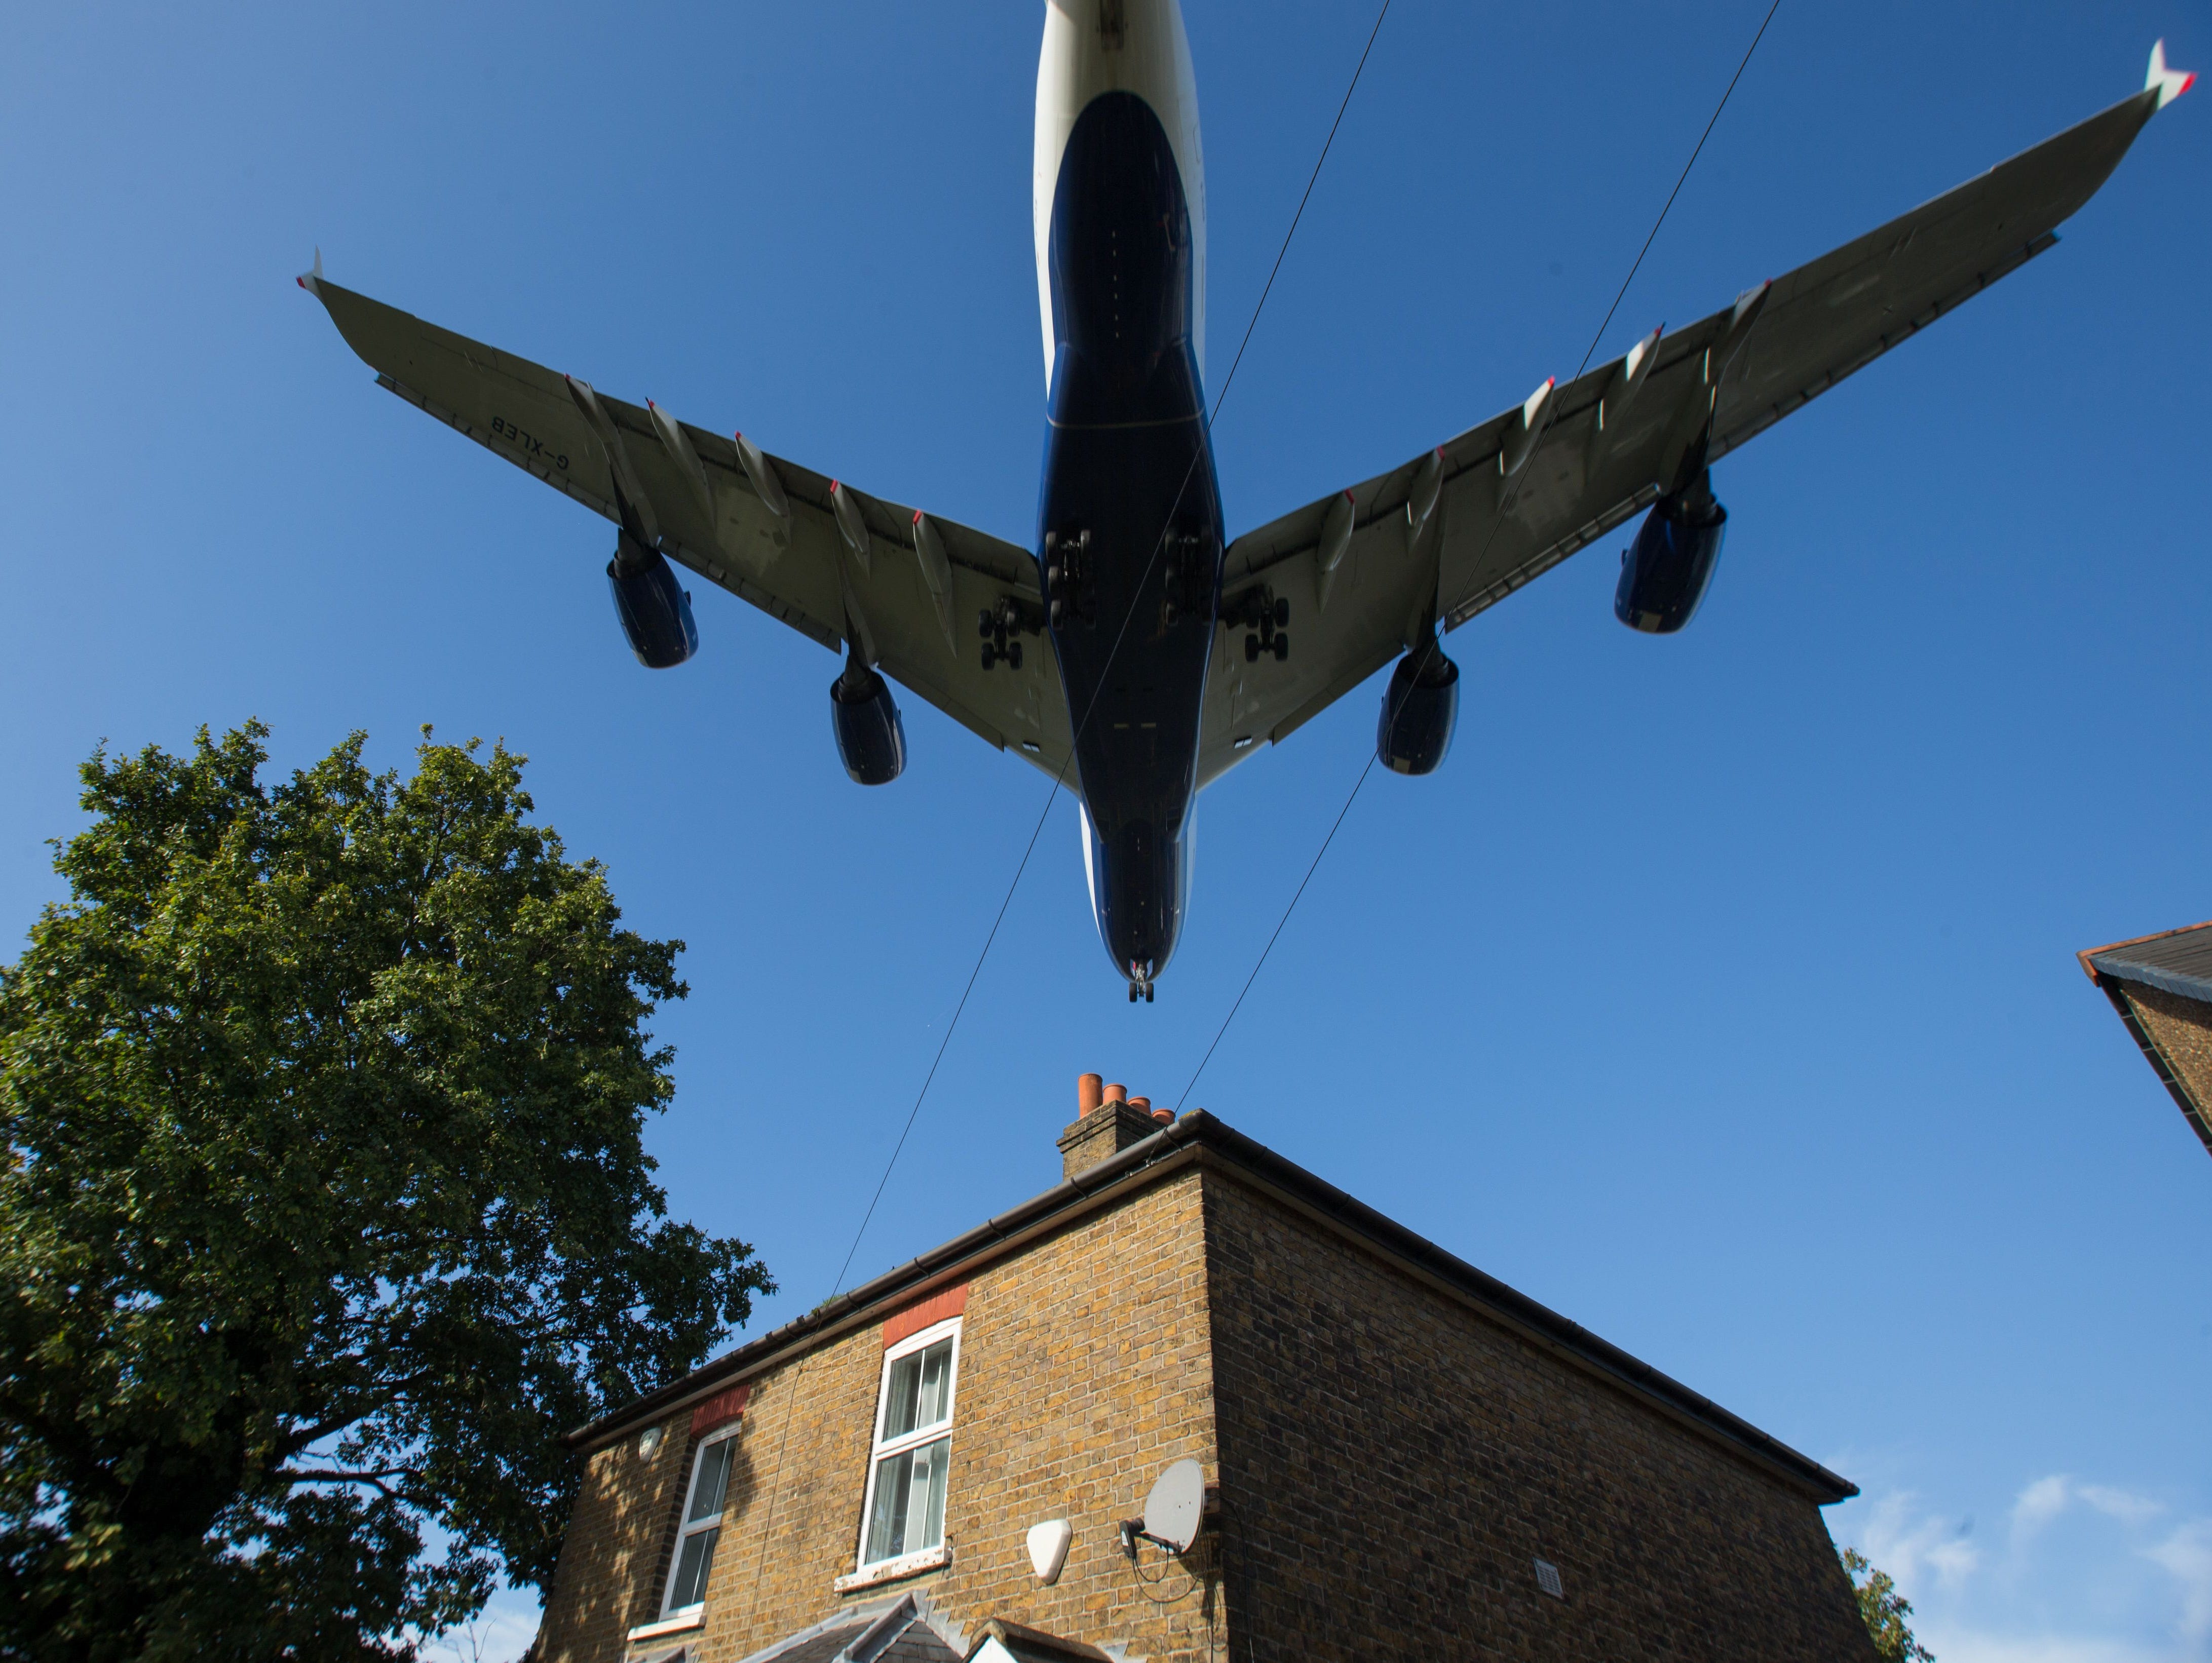 This file photo taken on Oct. 17, 2016 shows passenger aircraft preparing to land at London Heathrow Airport in west London.